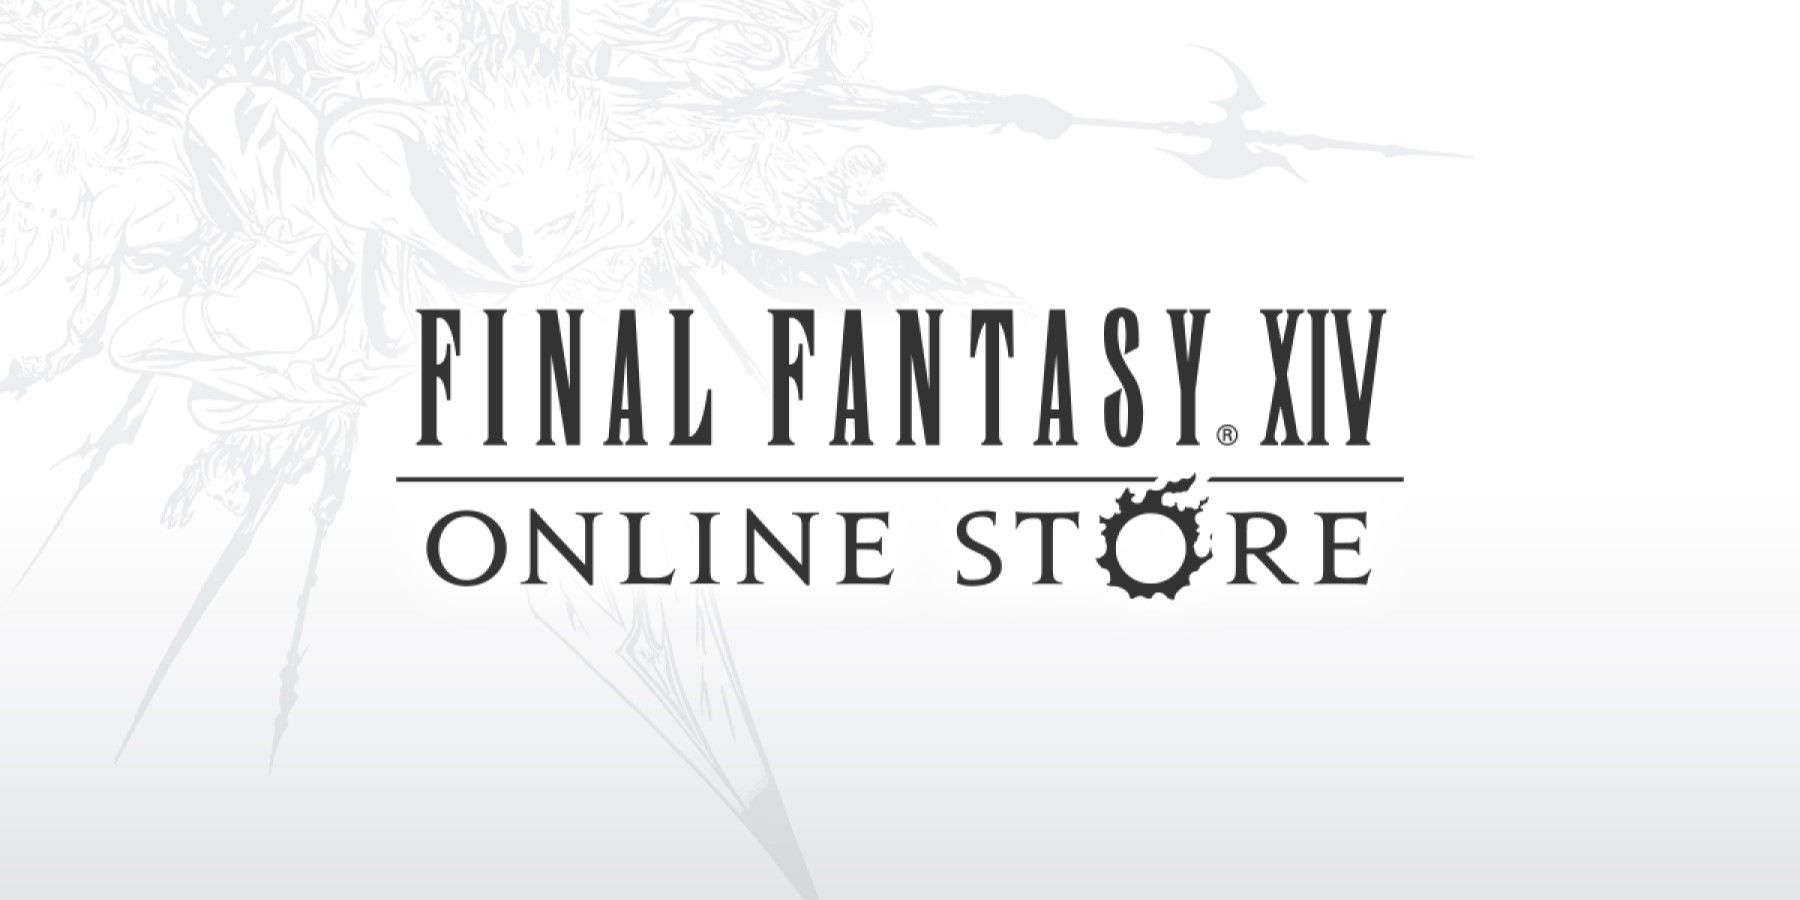 ffxiv store rmt crackdown restrictions